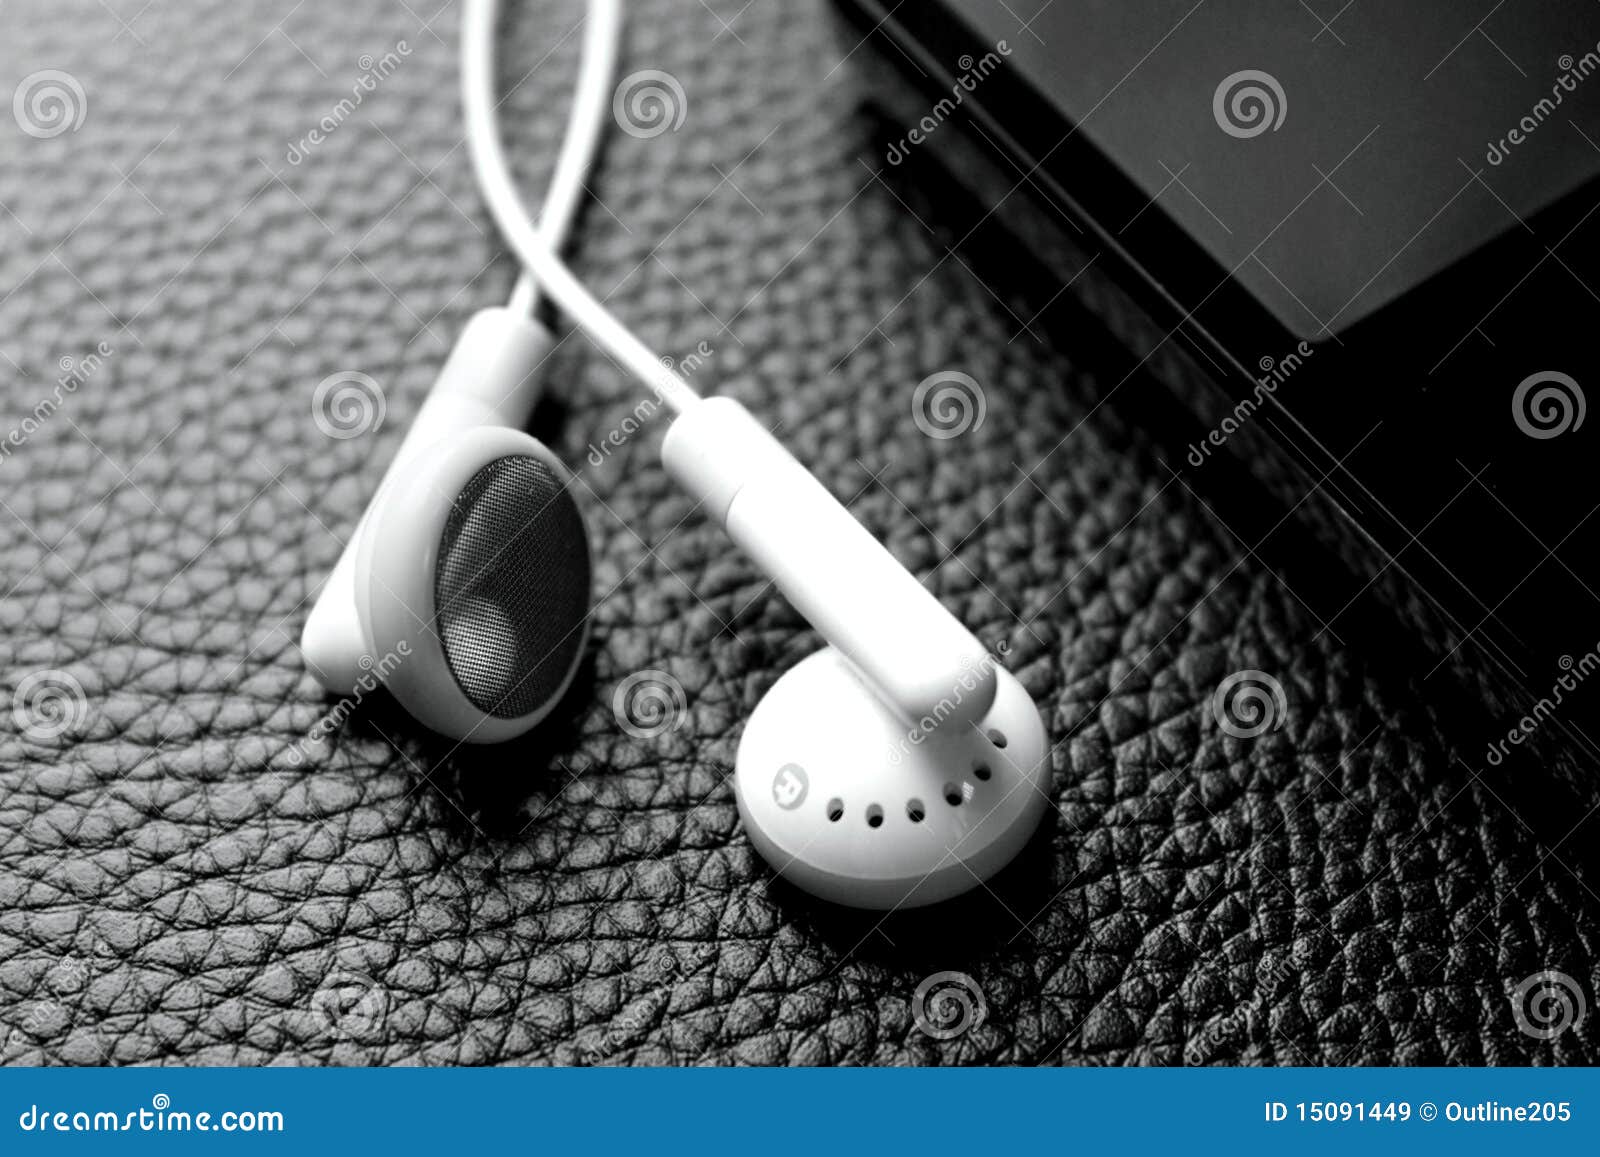 earphones and portable music,video player